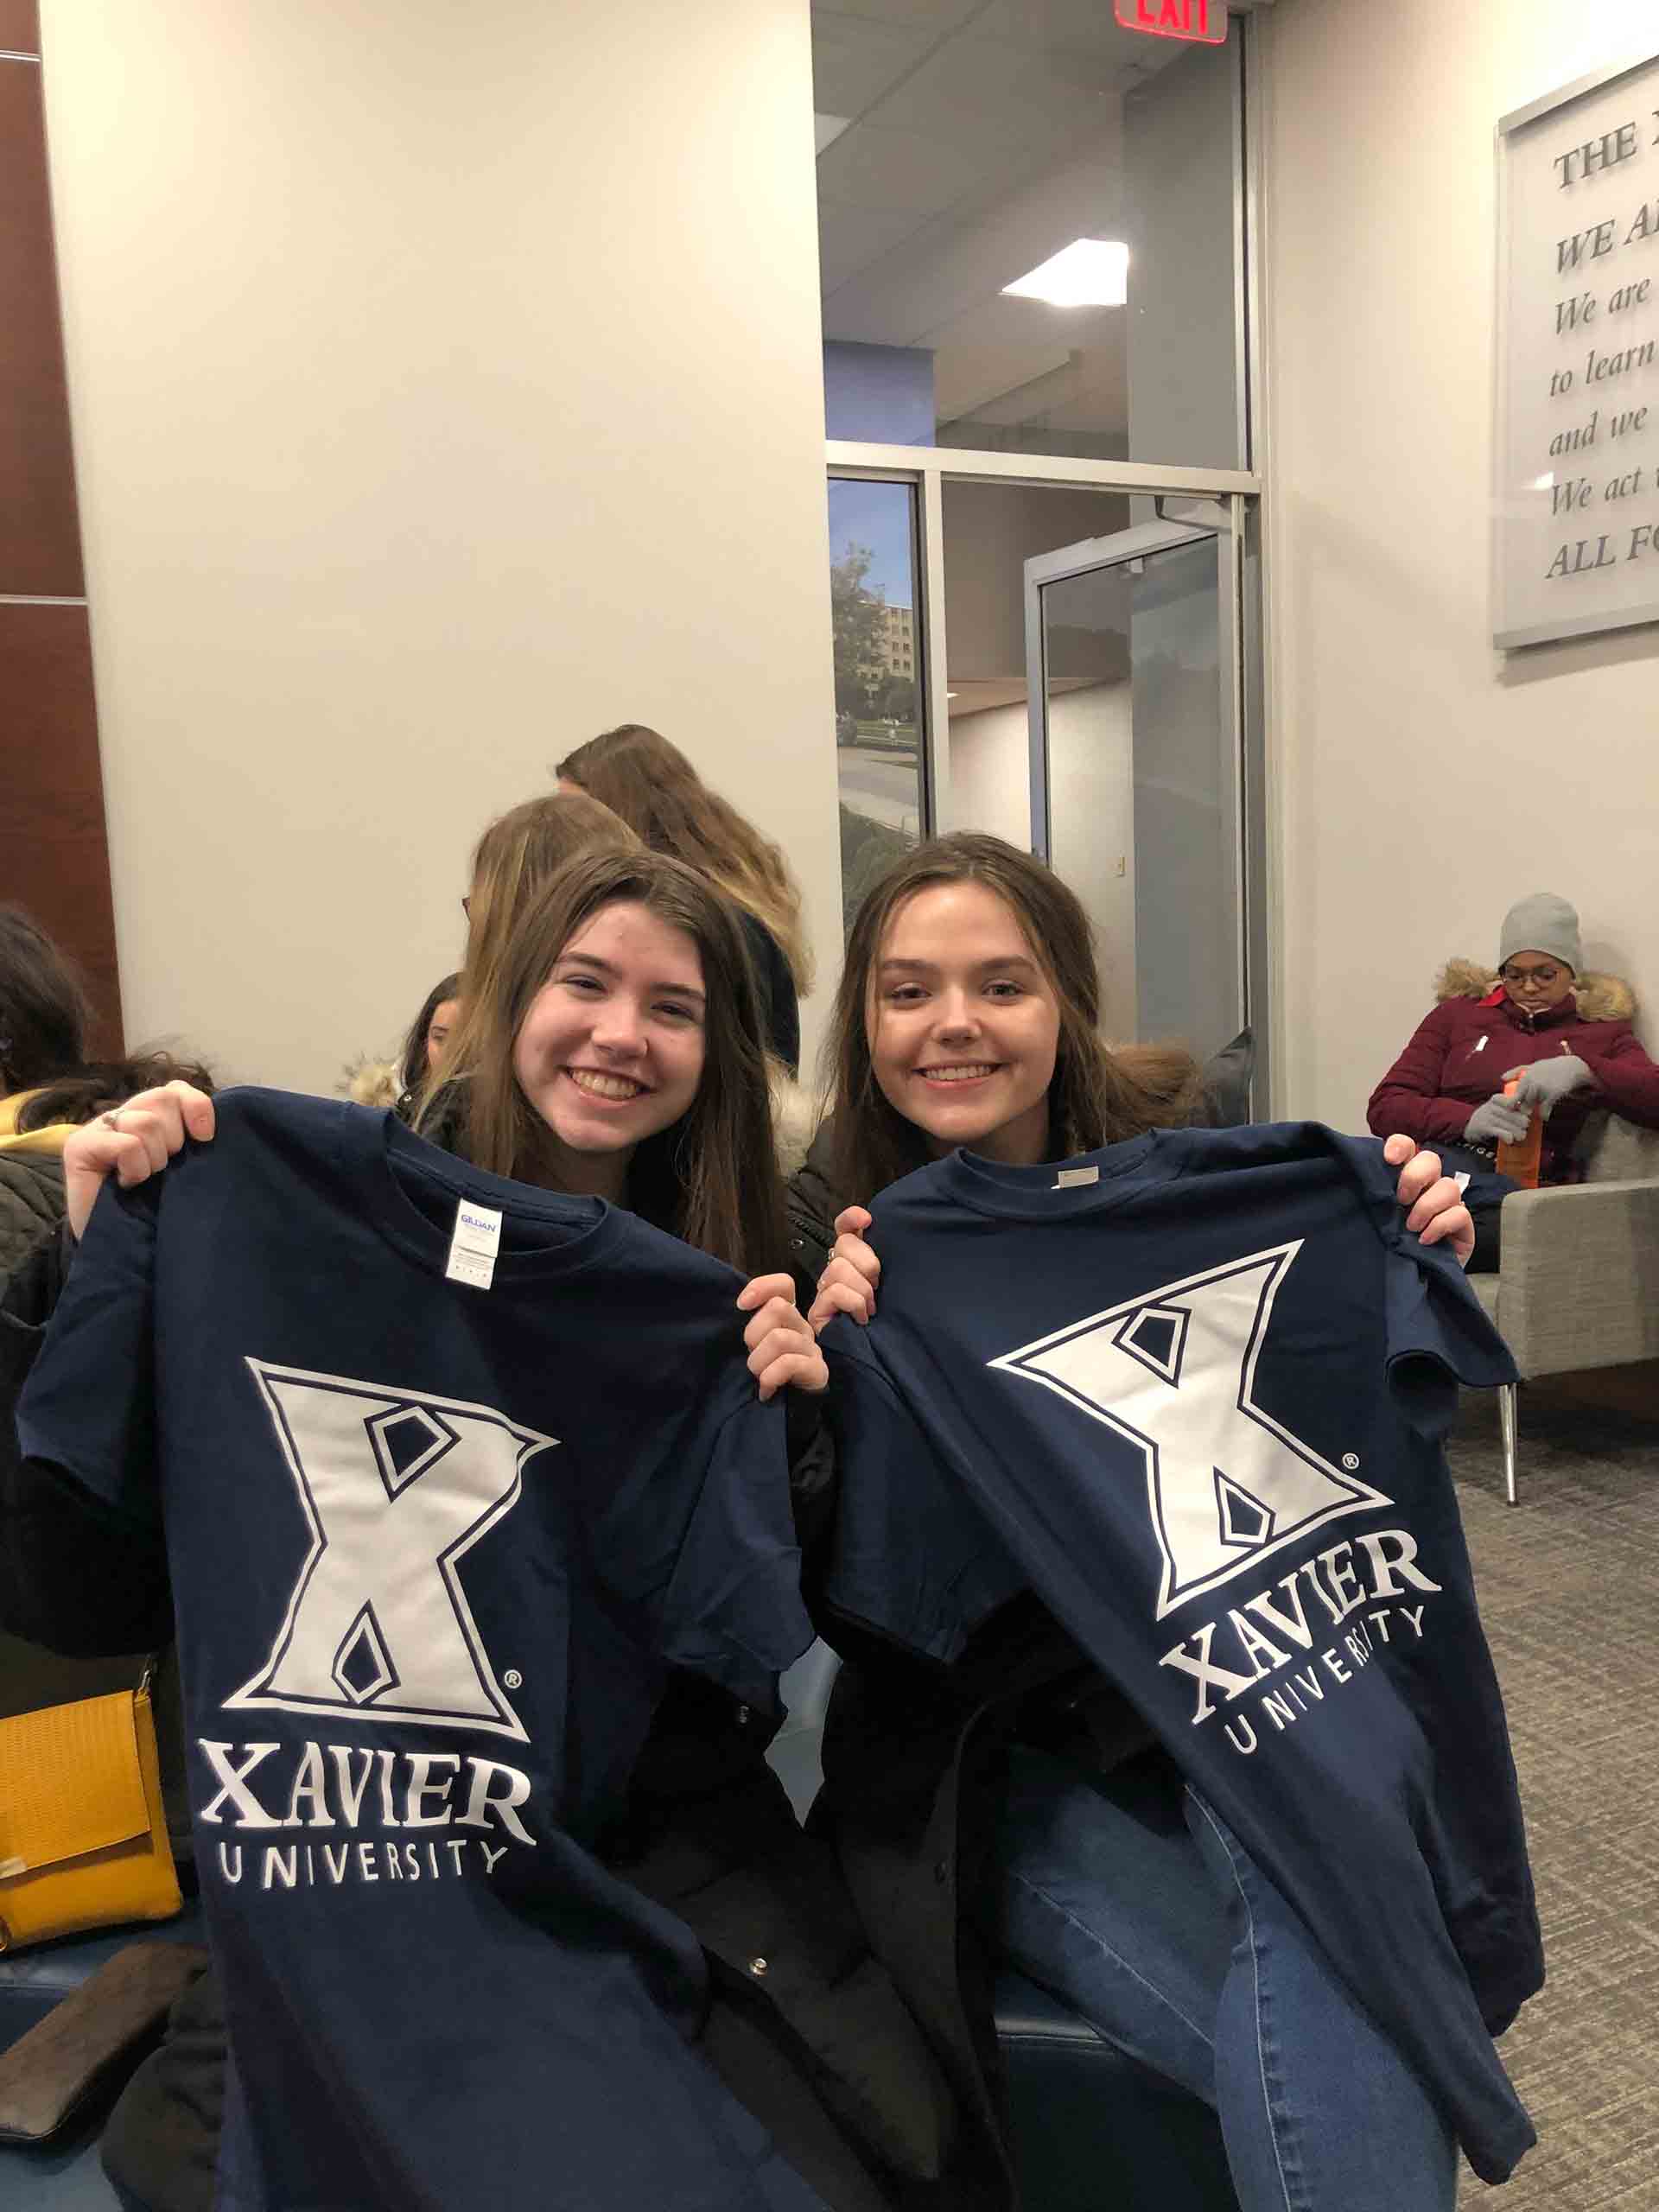 2020-explore-college-tour-students-holding-xavier-shirts